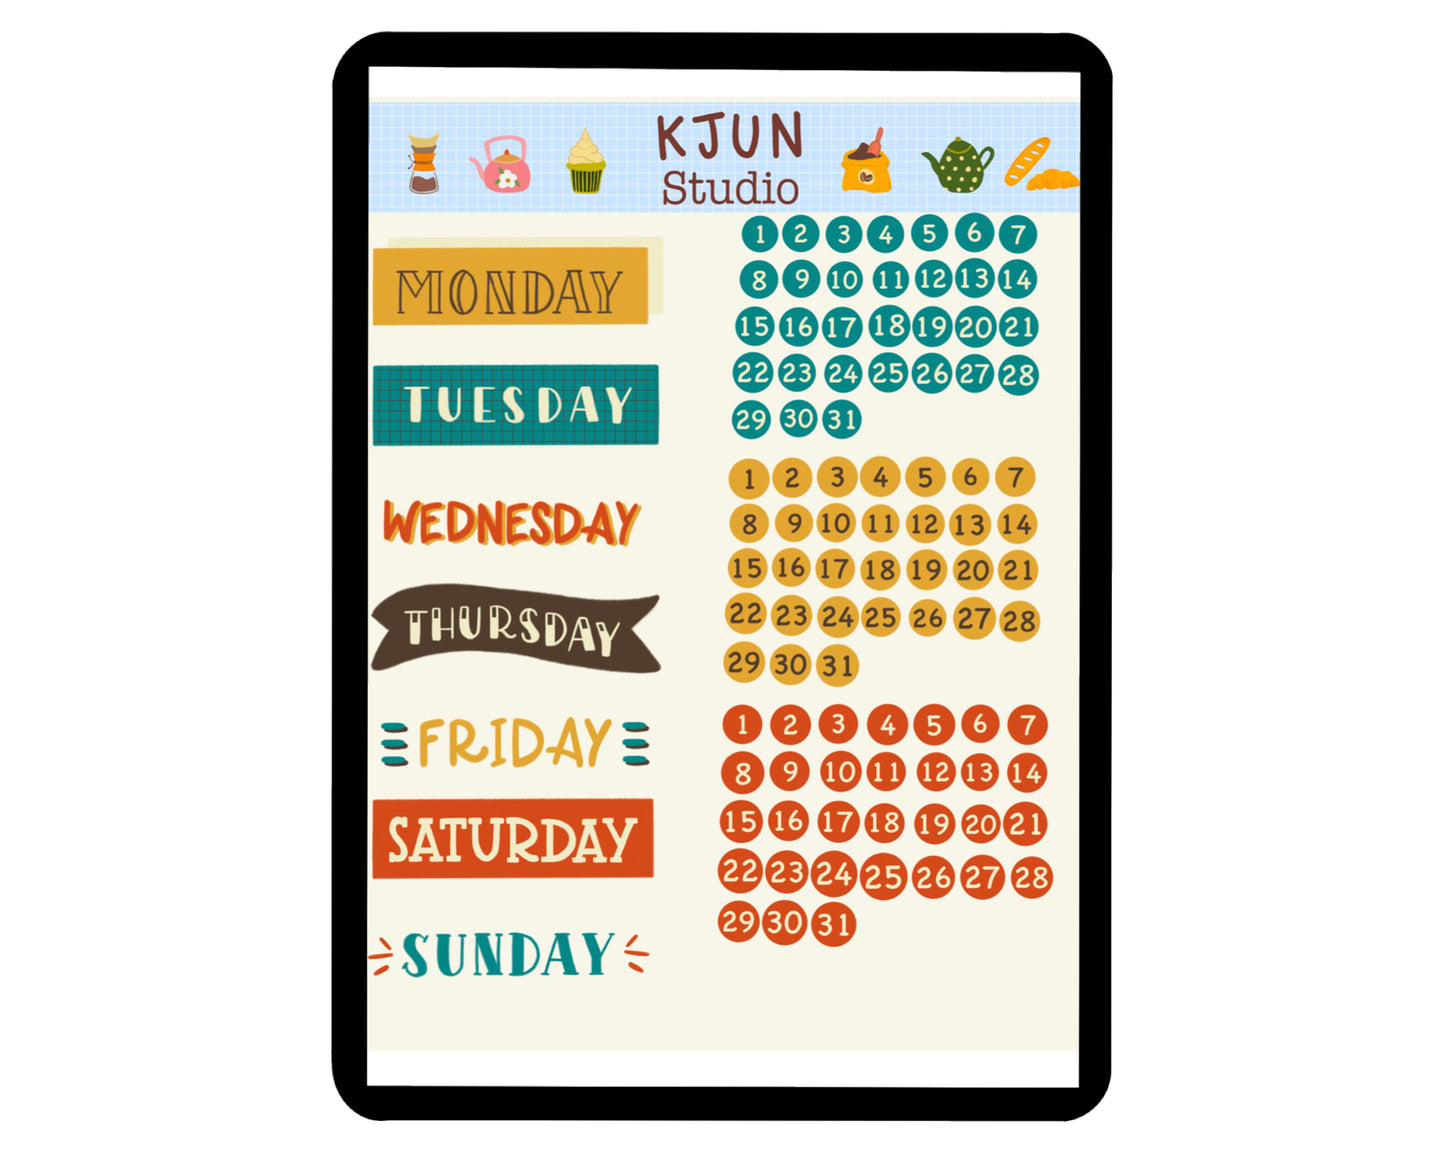 Digital Sticker - Days of the week and Date in Vintage theme